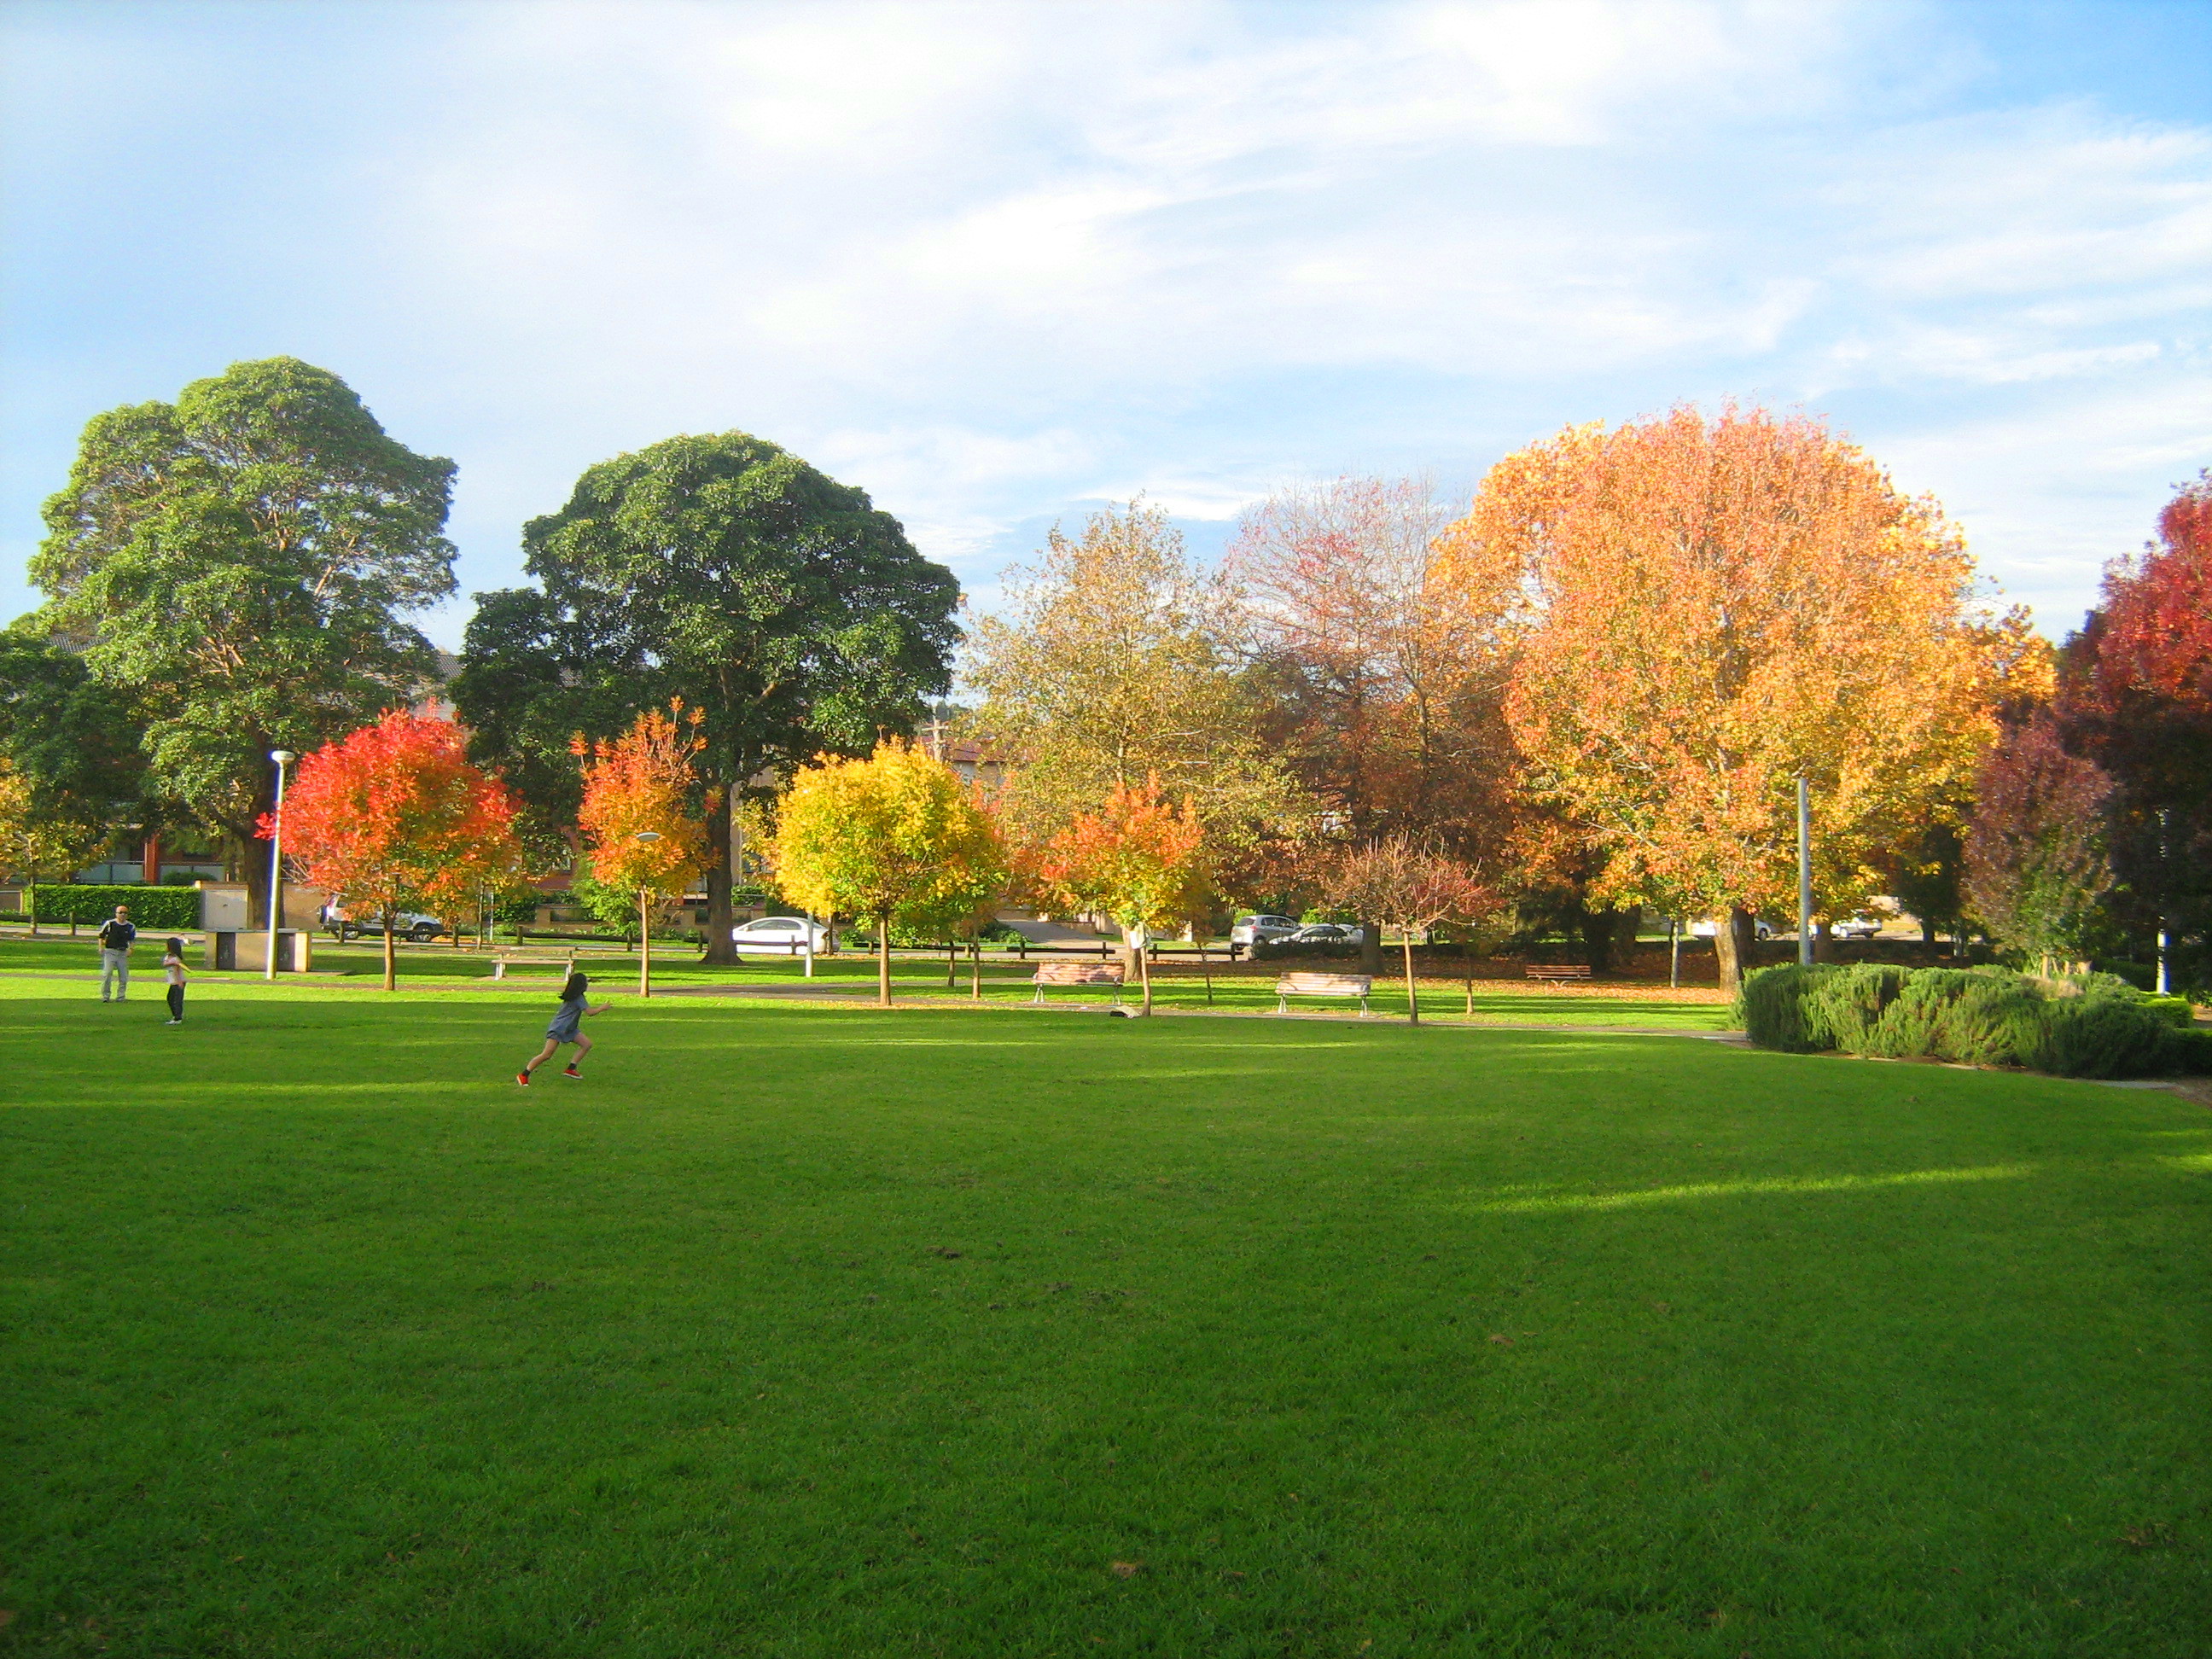 More of Anzac Park autumn colours with beautiful lush green grass ...